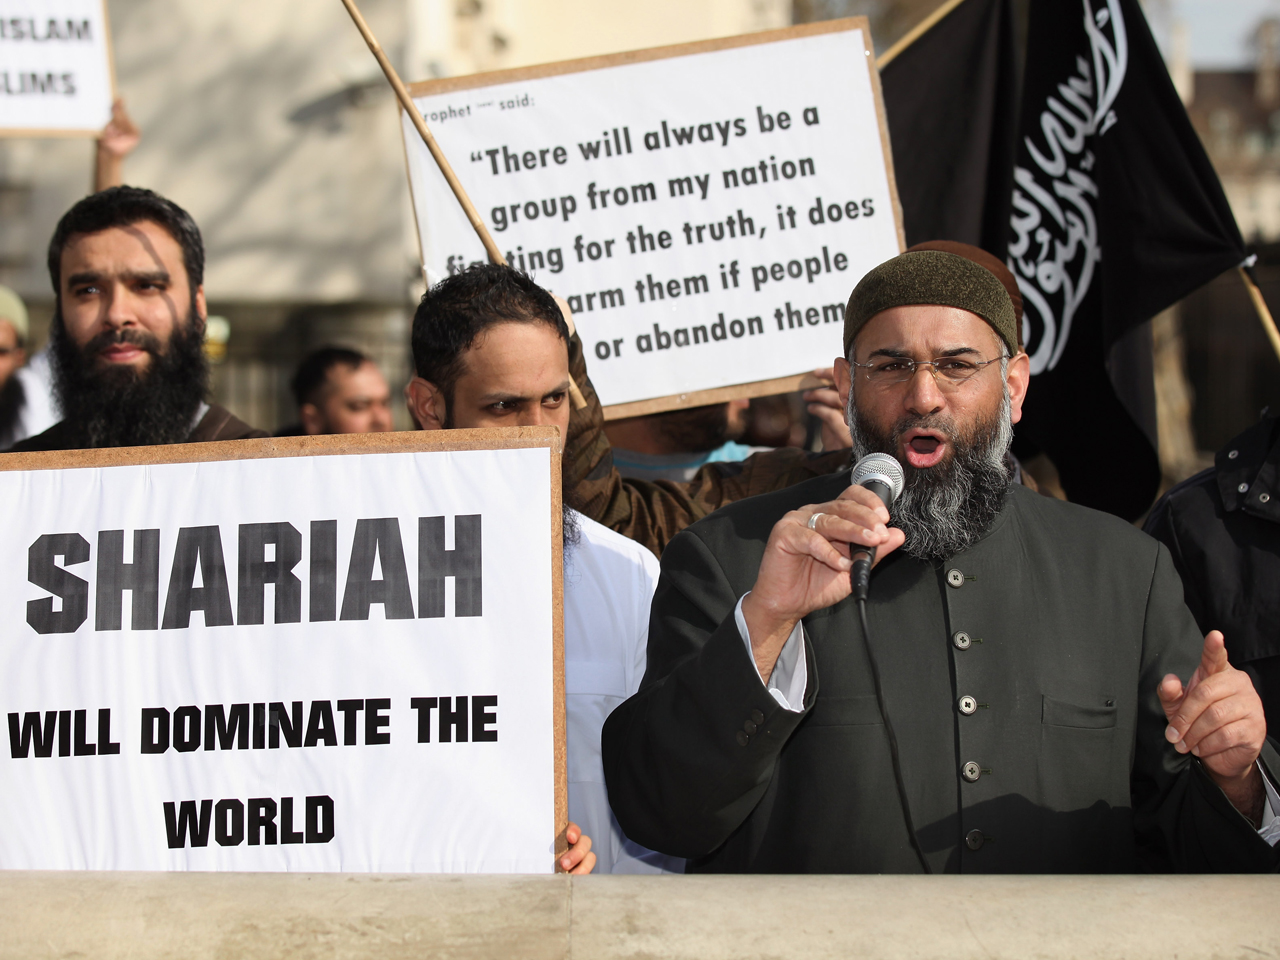 Anjem Choudary Islamic Extremist Preacher Of London Guilty Of Inviting